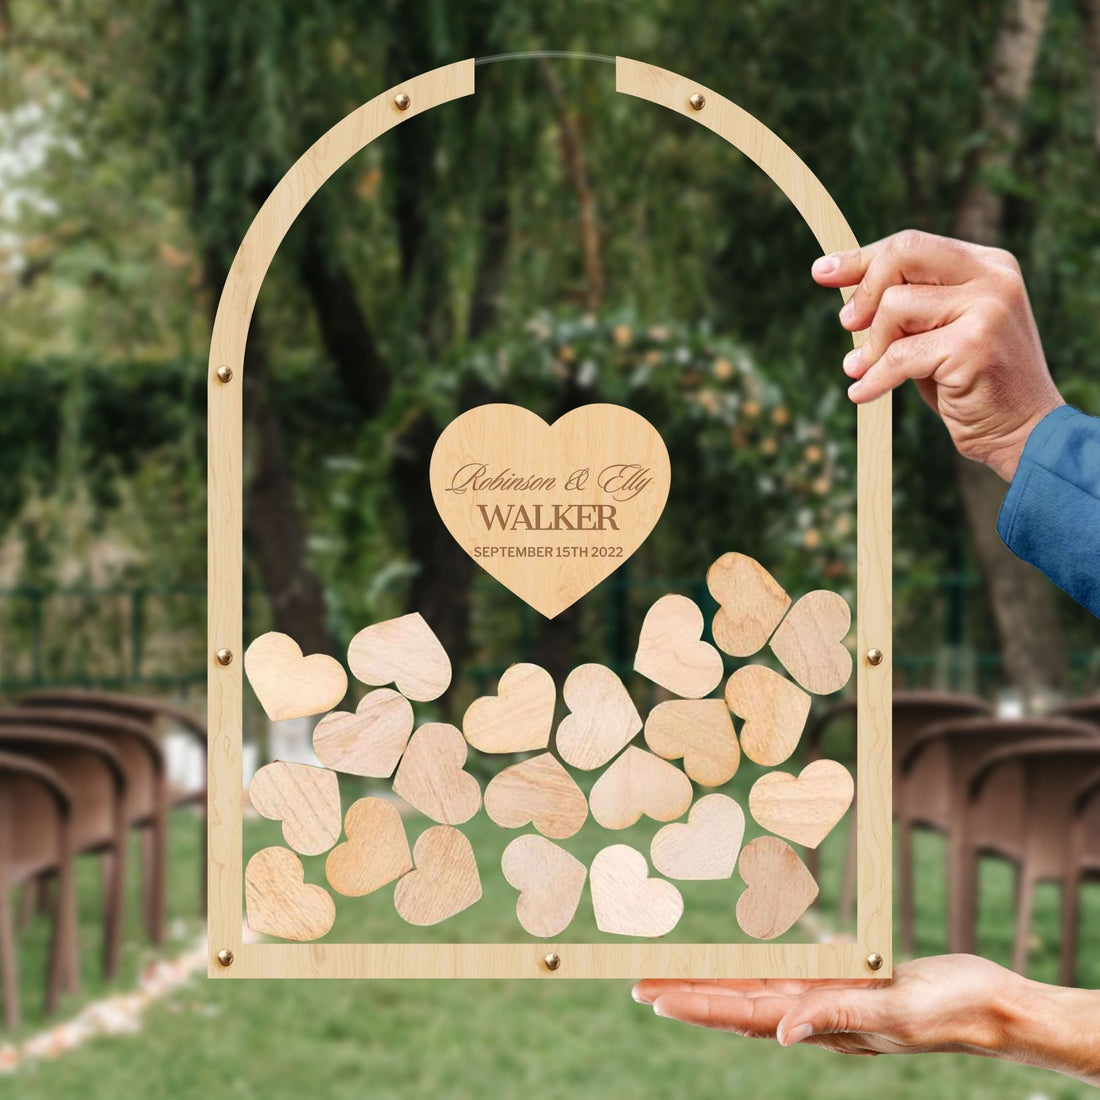 Custom Made Laser Cut Plywood & Acrylic Arch Shape Wedding Heart Chips Drop Box, Rustic Personalised Guest Book Alternative, Stationery Table Decor